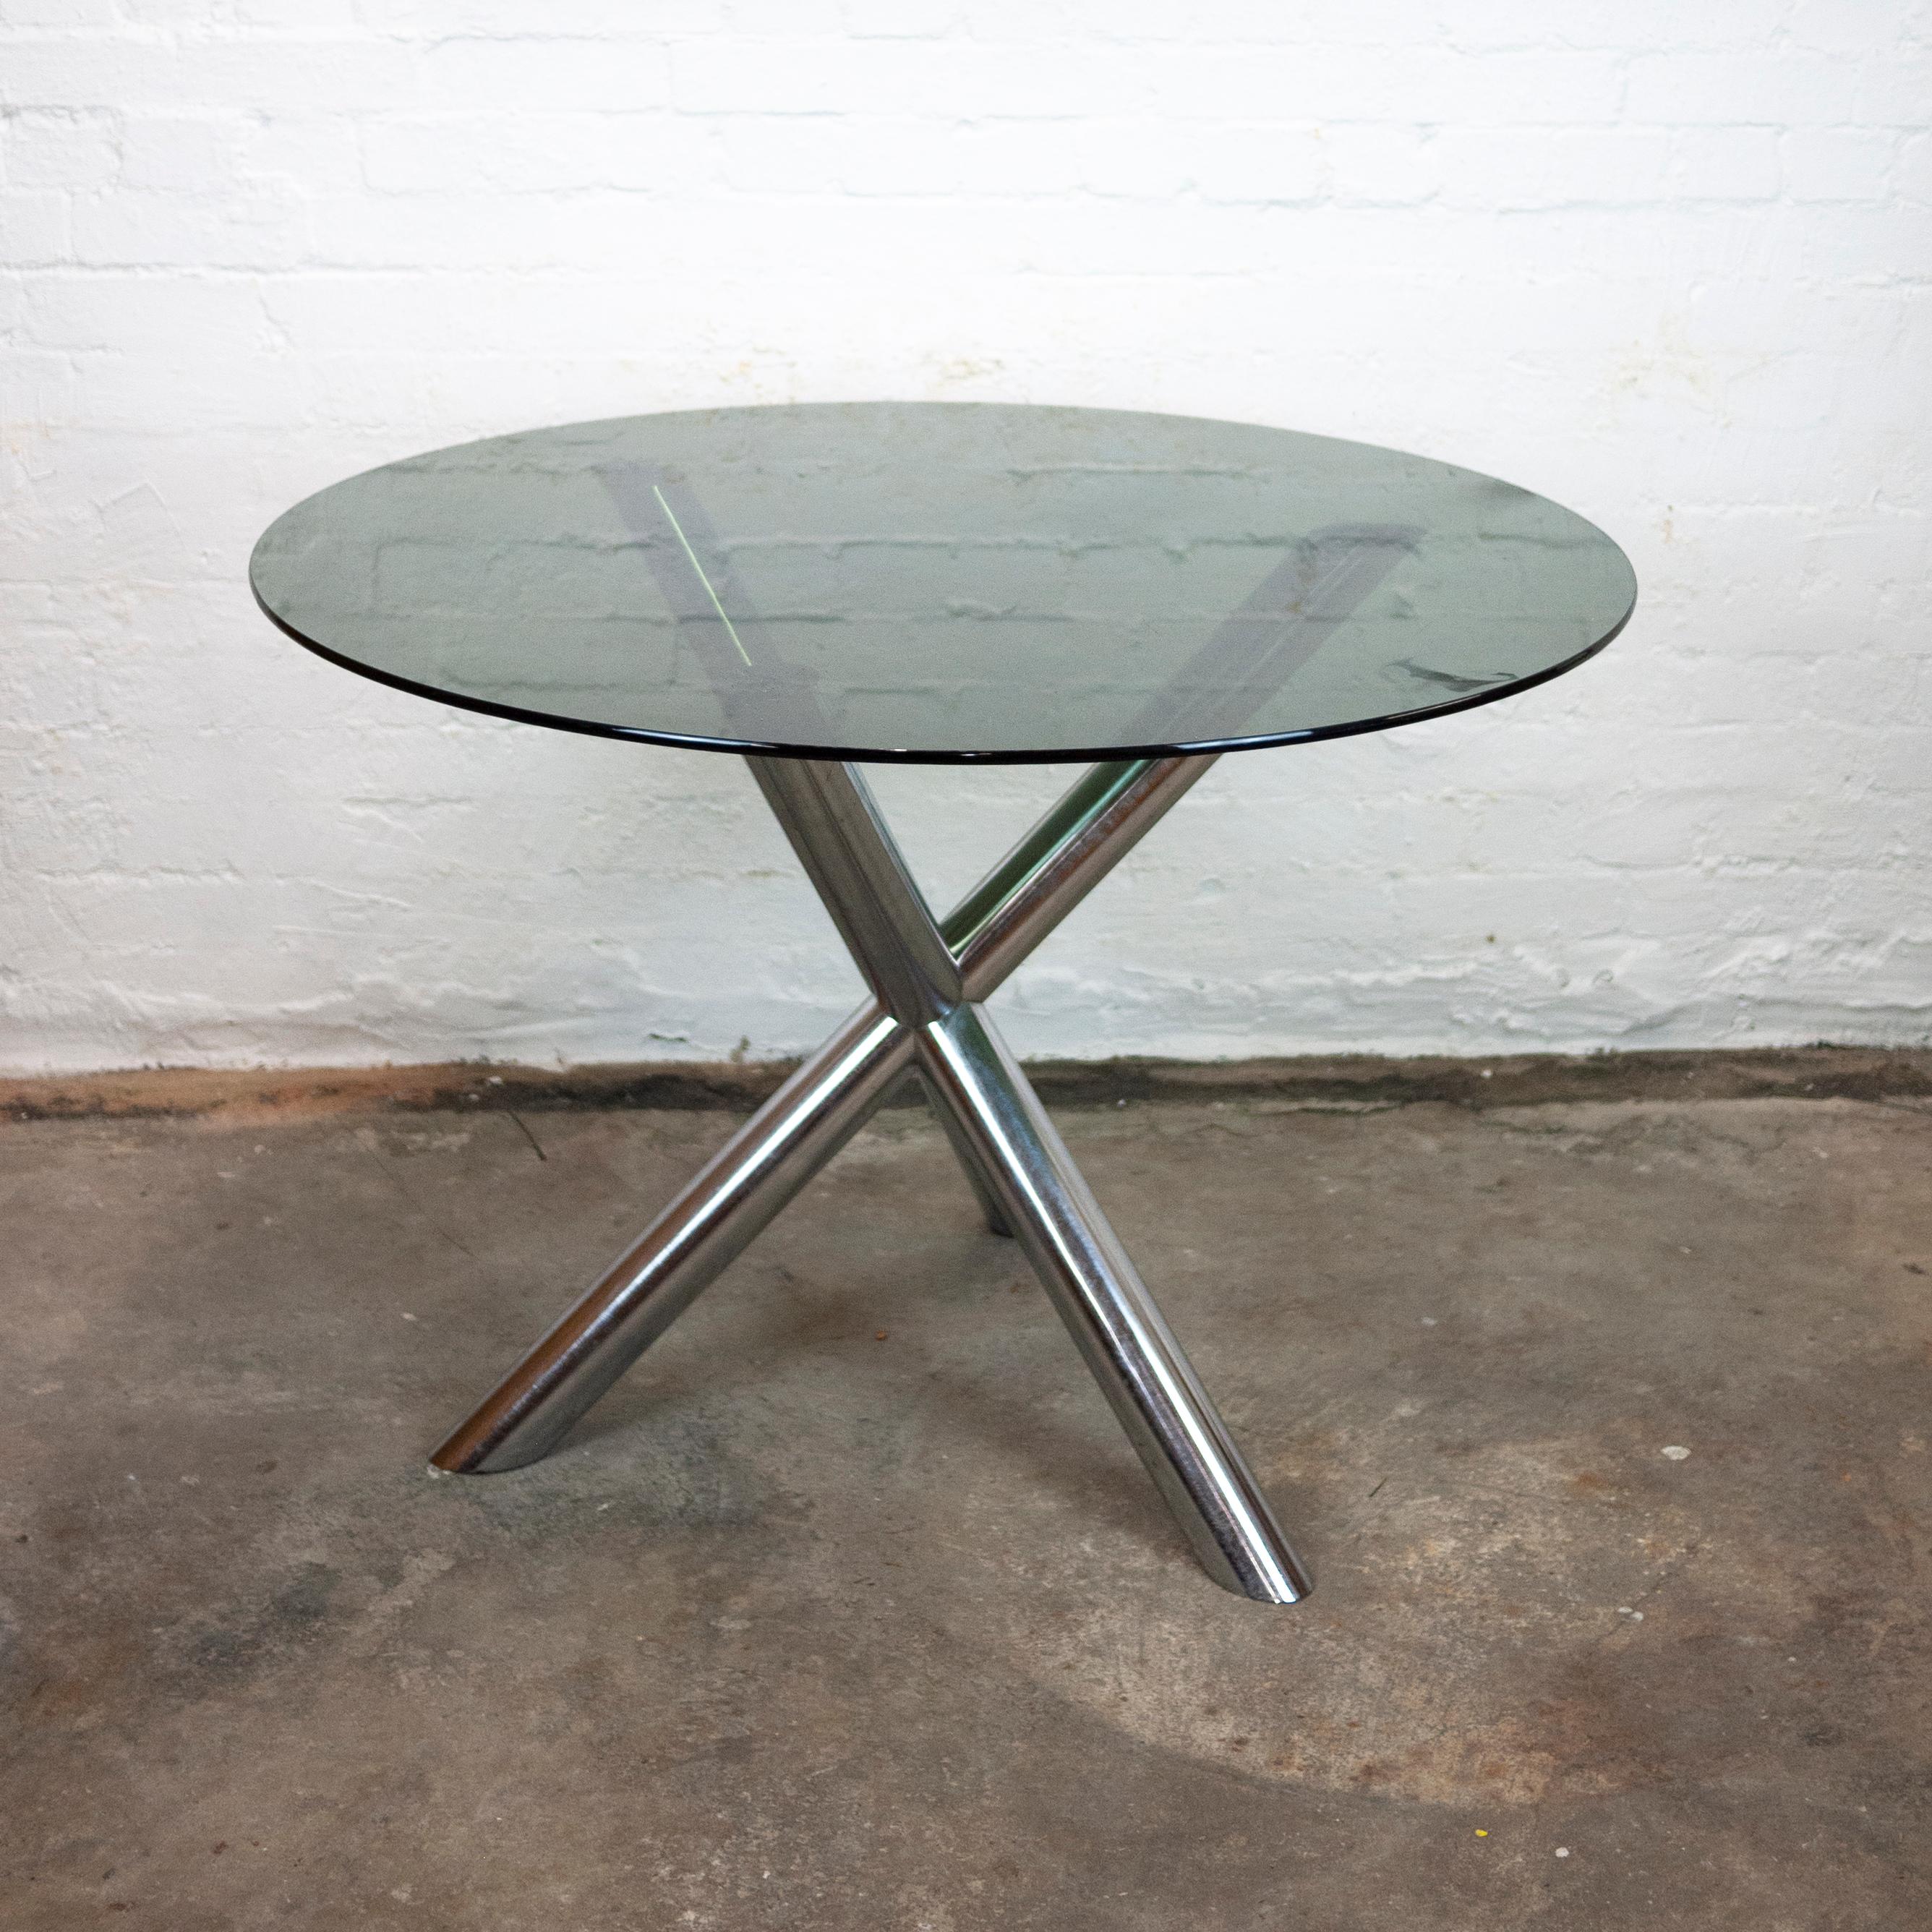 A round smoked glass top dining table with a chrome tripod base.

Designer - Renato Zevi

Manufacturer - Roche Bobois

Design Period - 1970 to 1979

Country of Manufacture - France

Style - Mid-Century

Detailed Condition - Good with